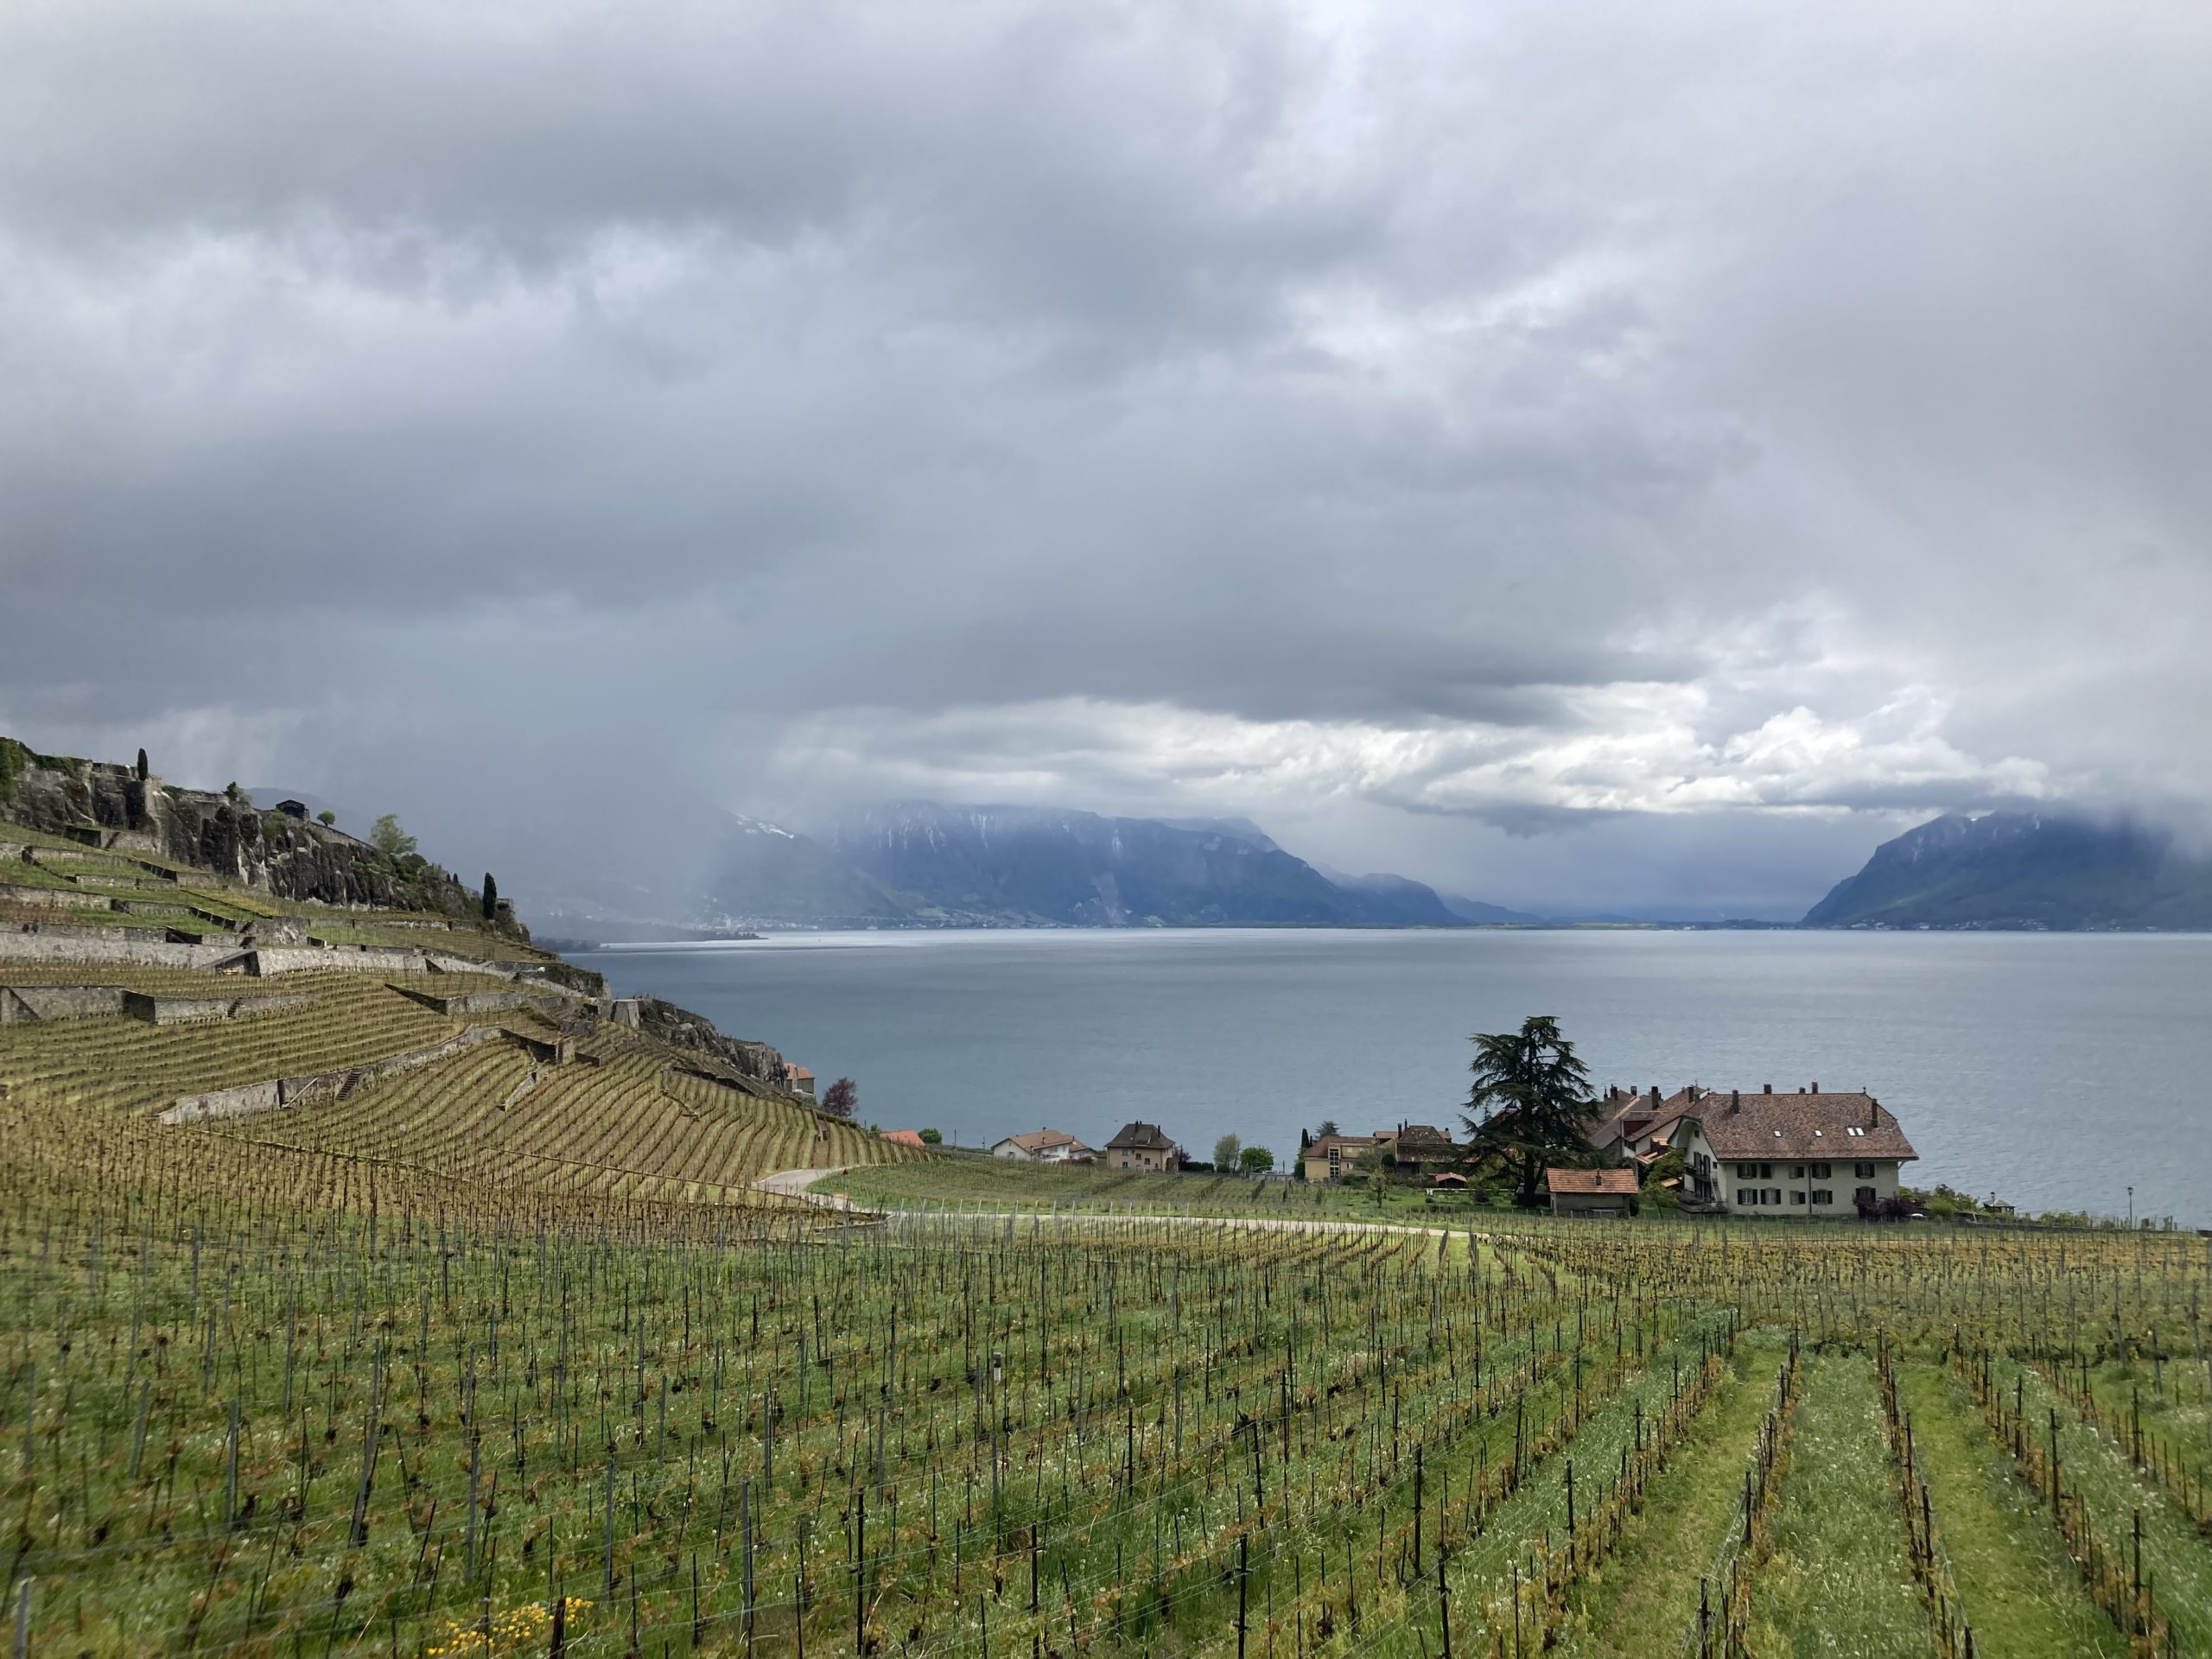 The Lavaux Walk from Puidoux to Vevey